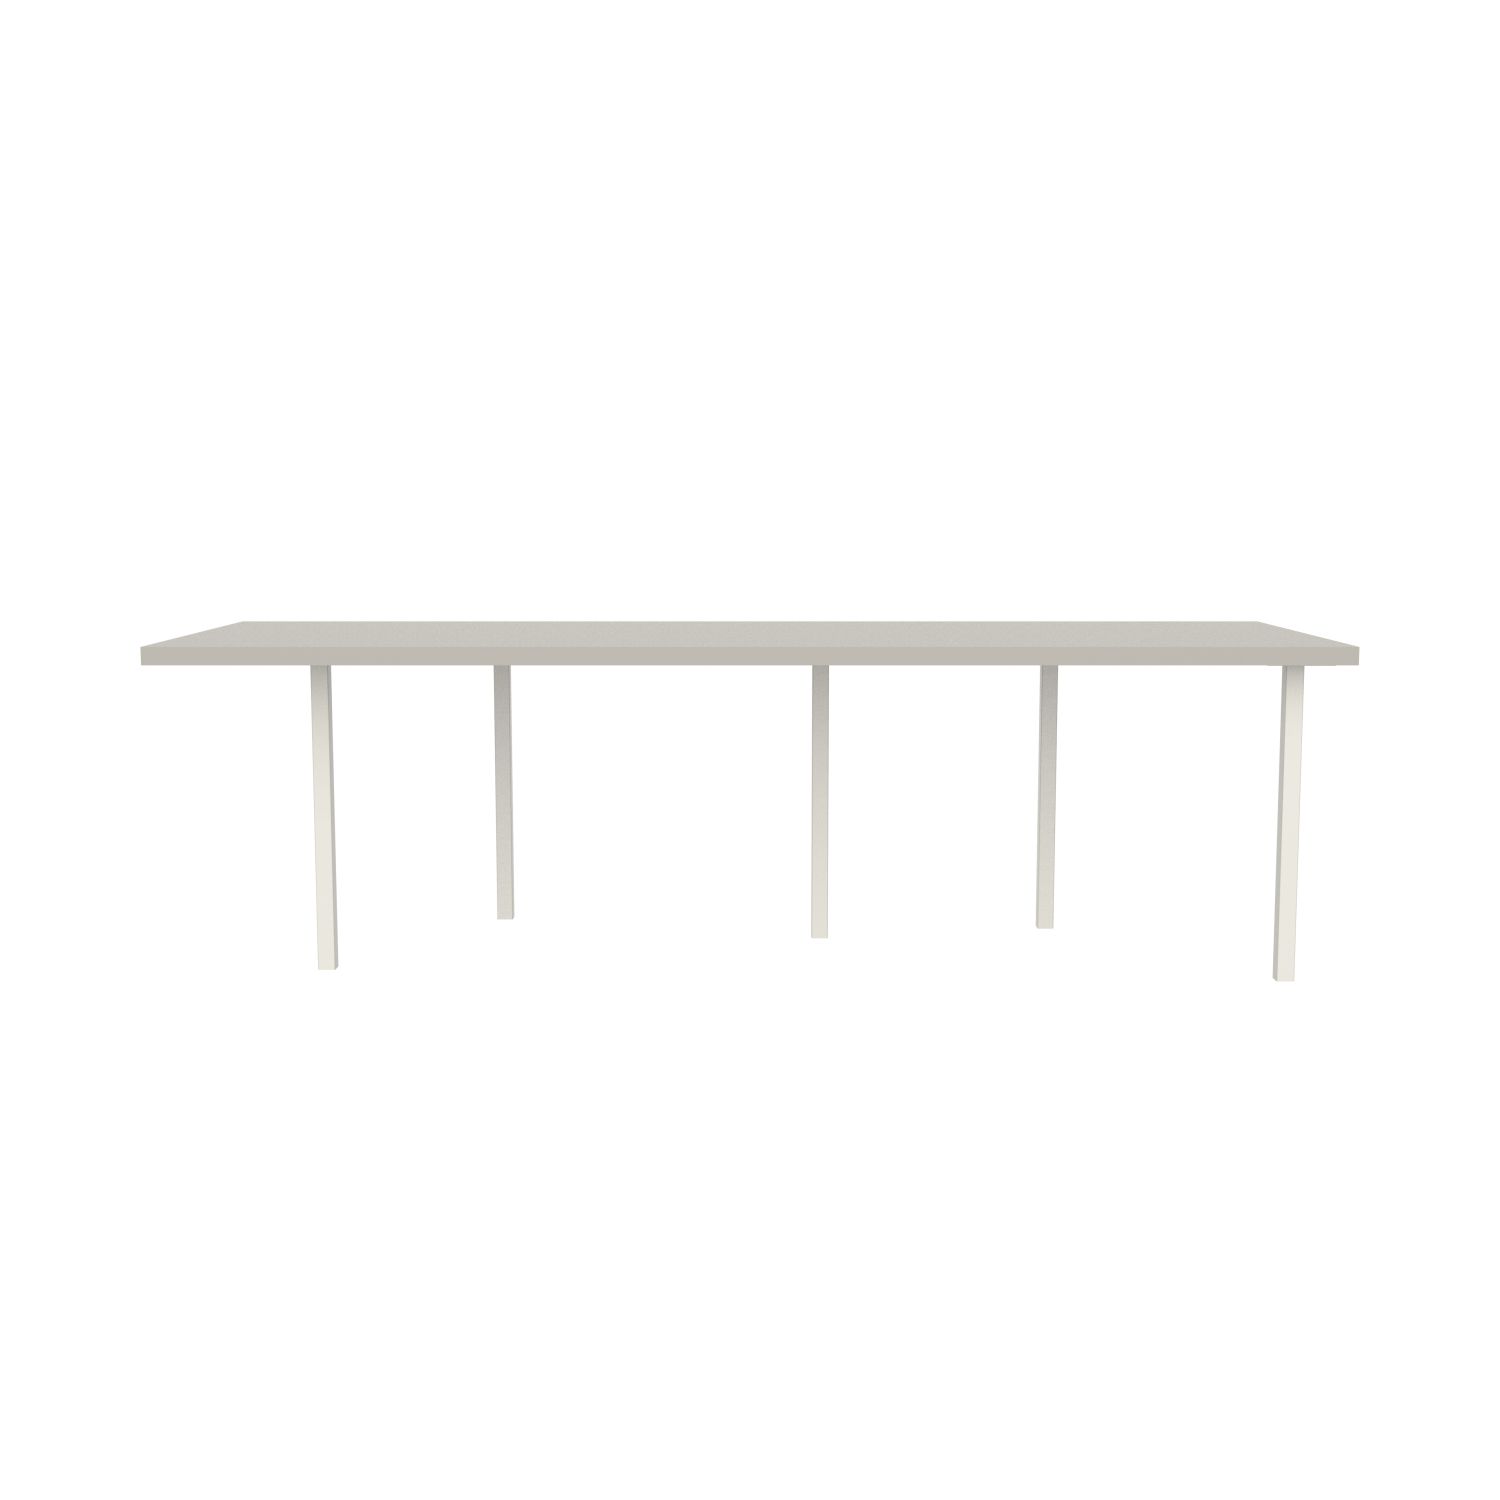 lensvelt bbrand table five fixed heigt 915x264 hpl white 50 mm price level 1 white ral9010